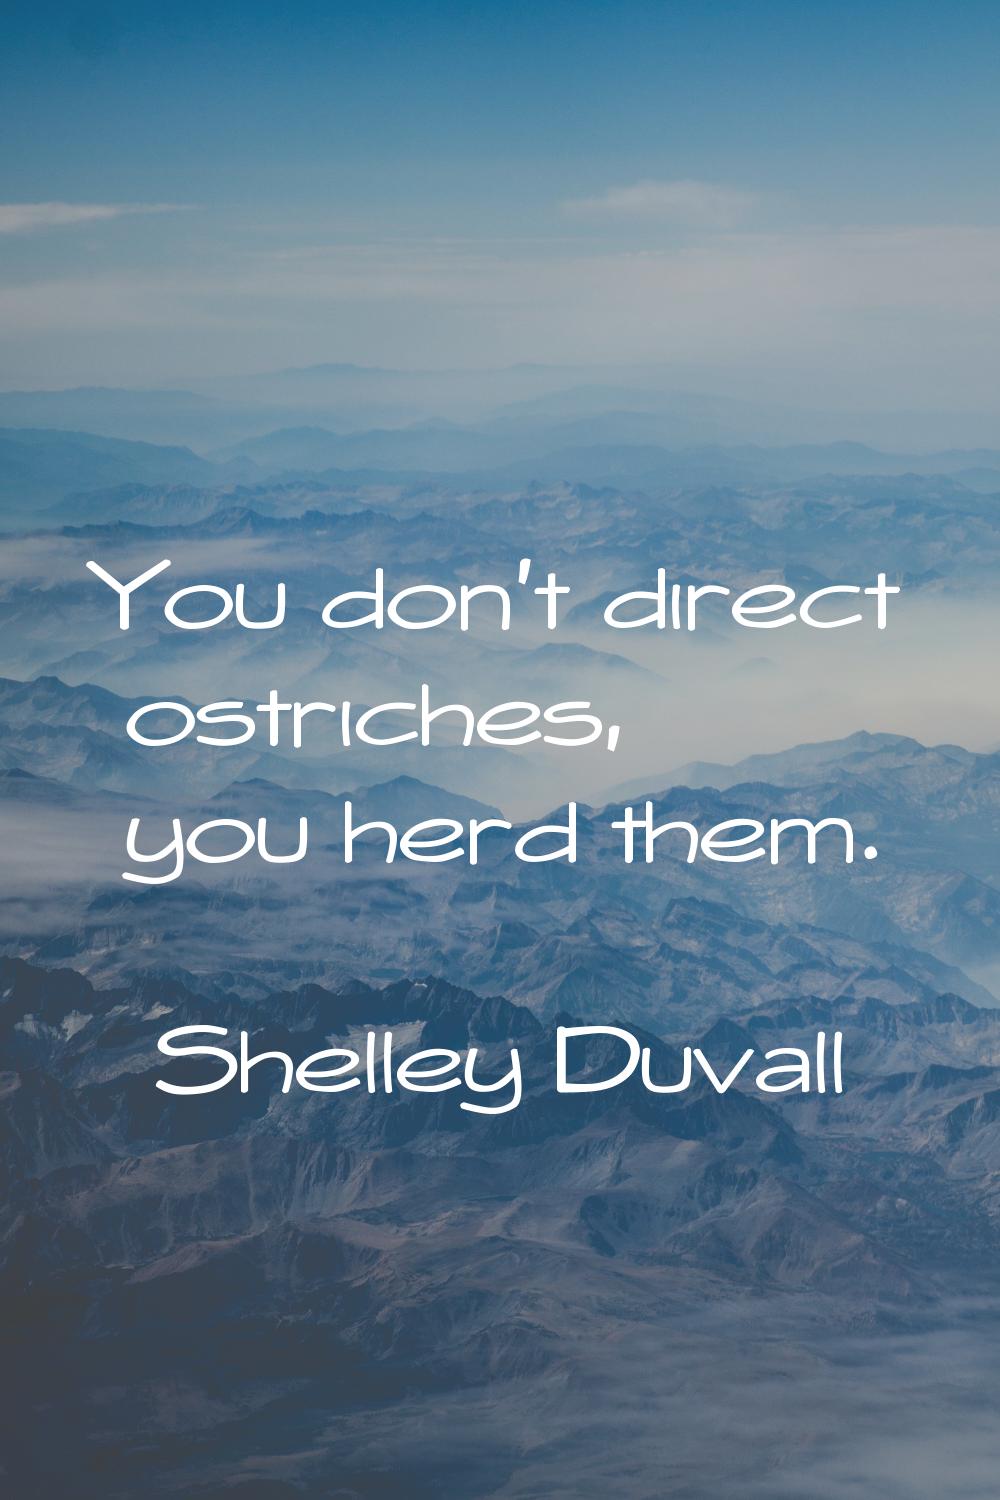 You don't direct ostriches, you herd them.